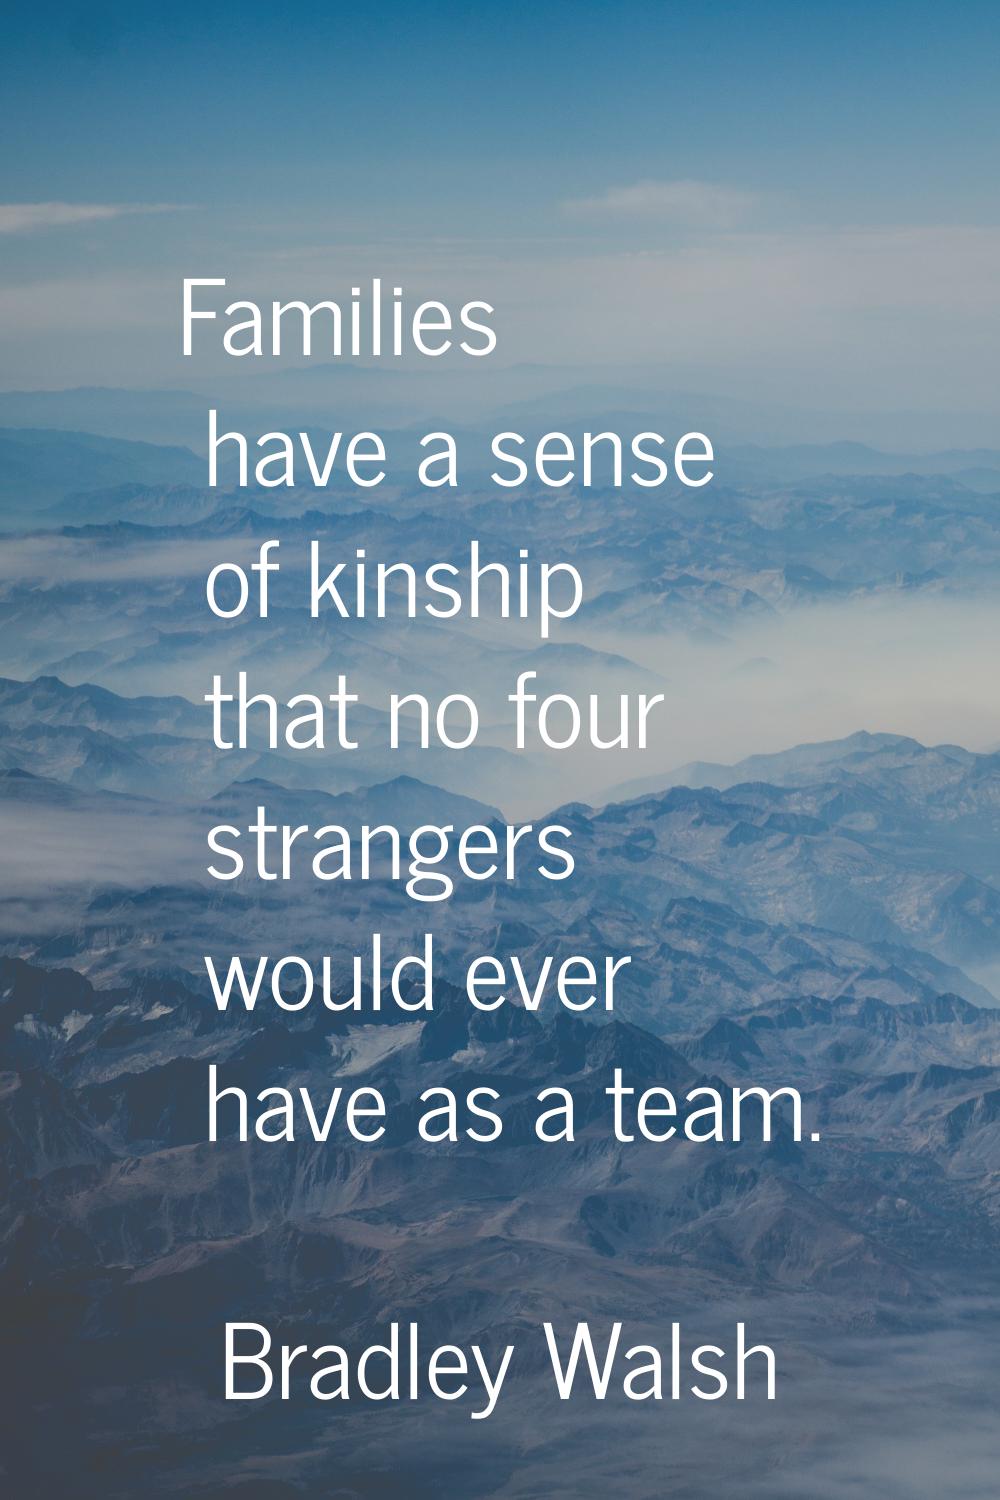 Families have a sense of kinship that no four strangers would ever have as a team.